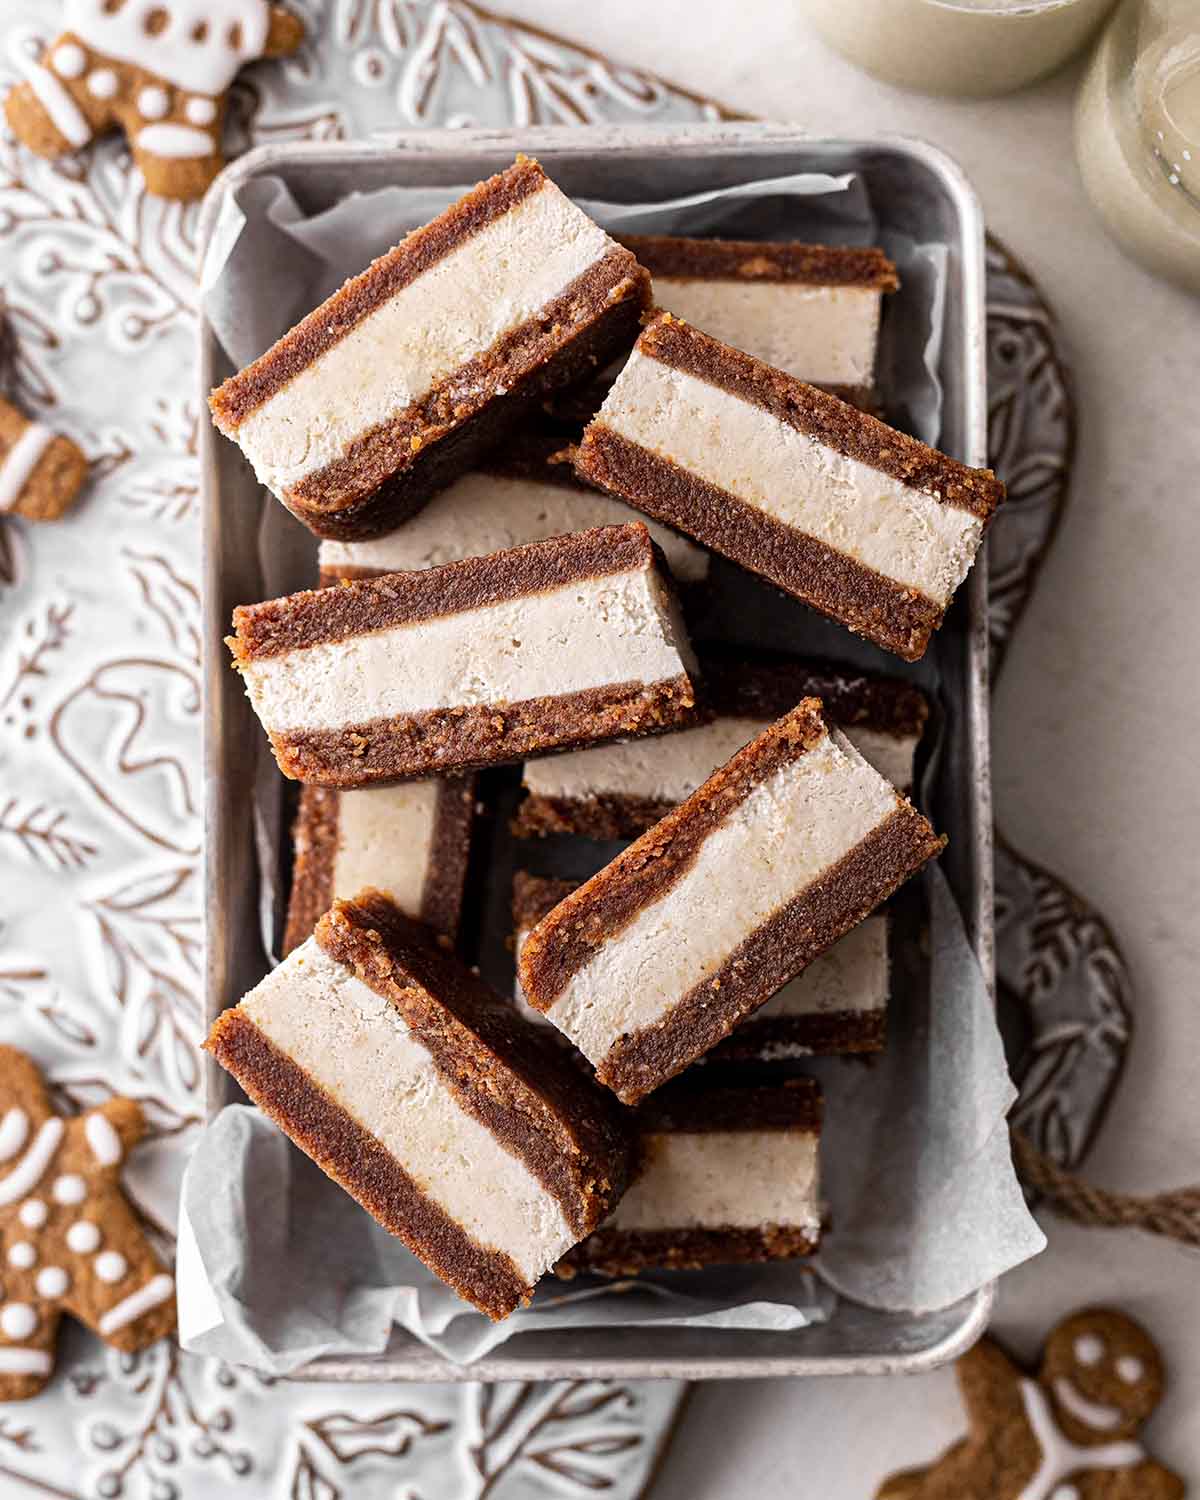 Vegan Ice Cream Sandwiches with Gingerbread Cookie Dough